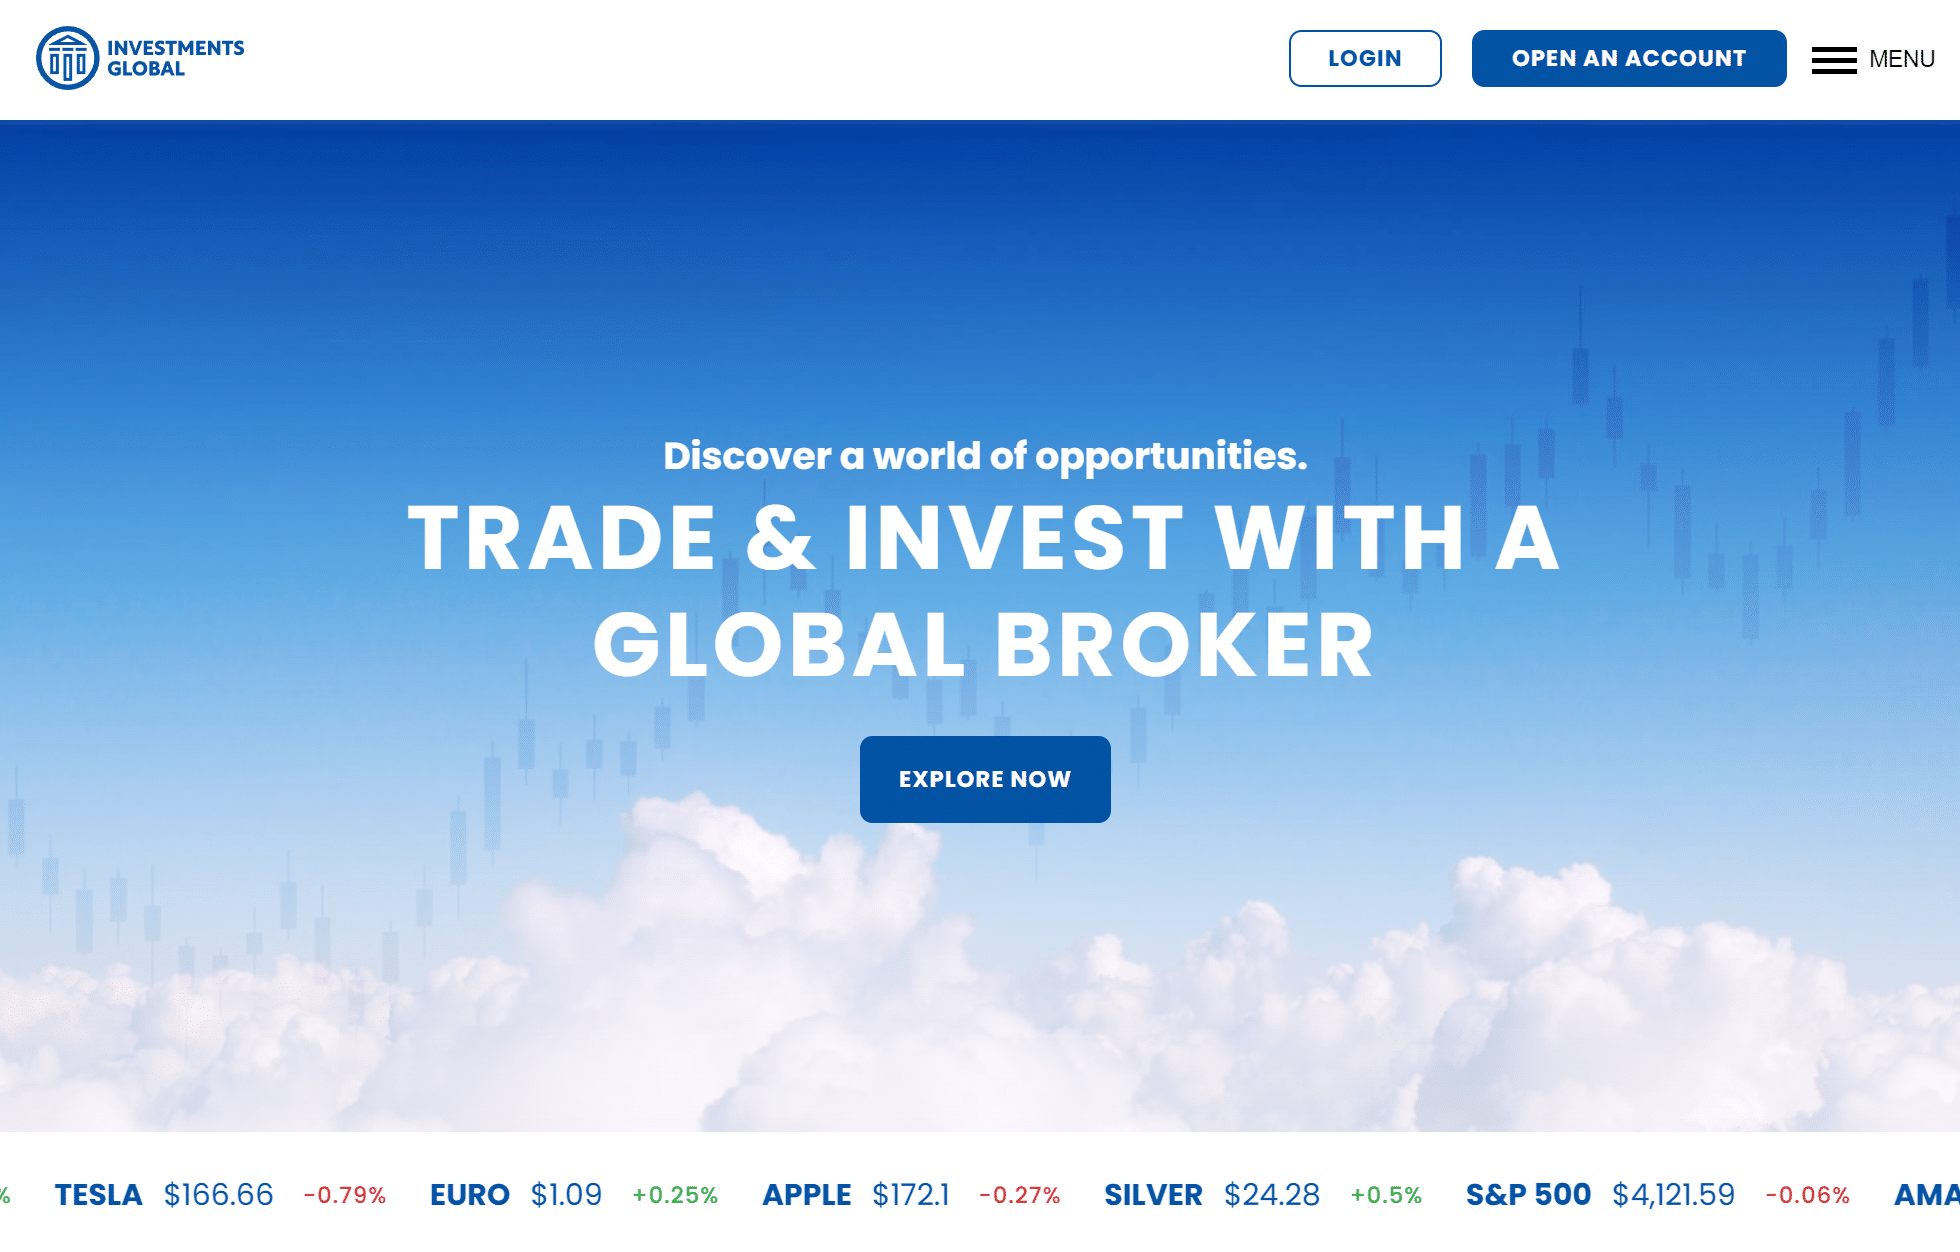 Investments Global website